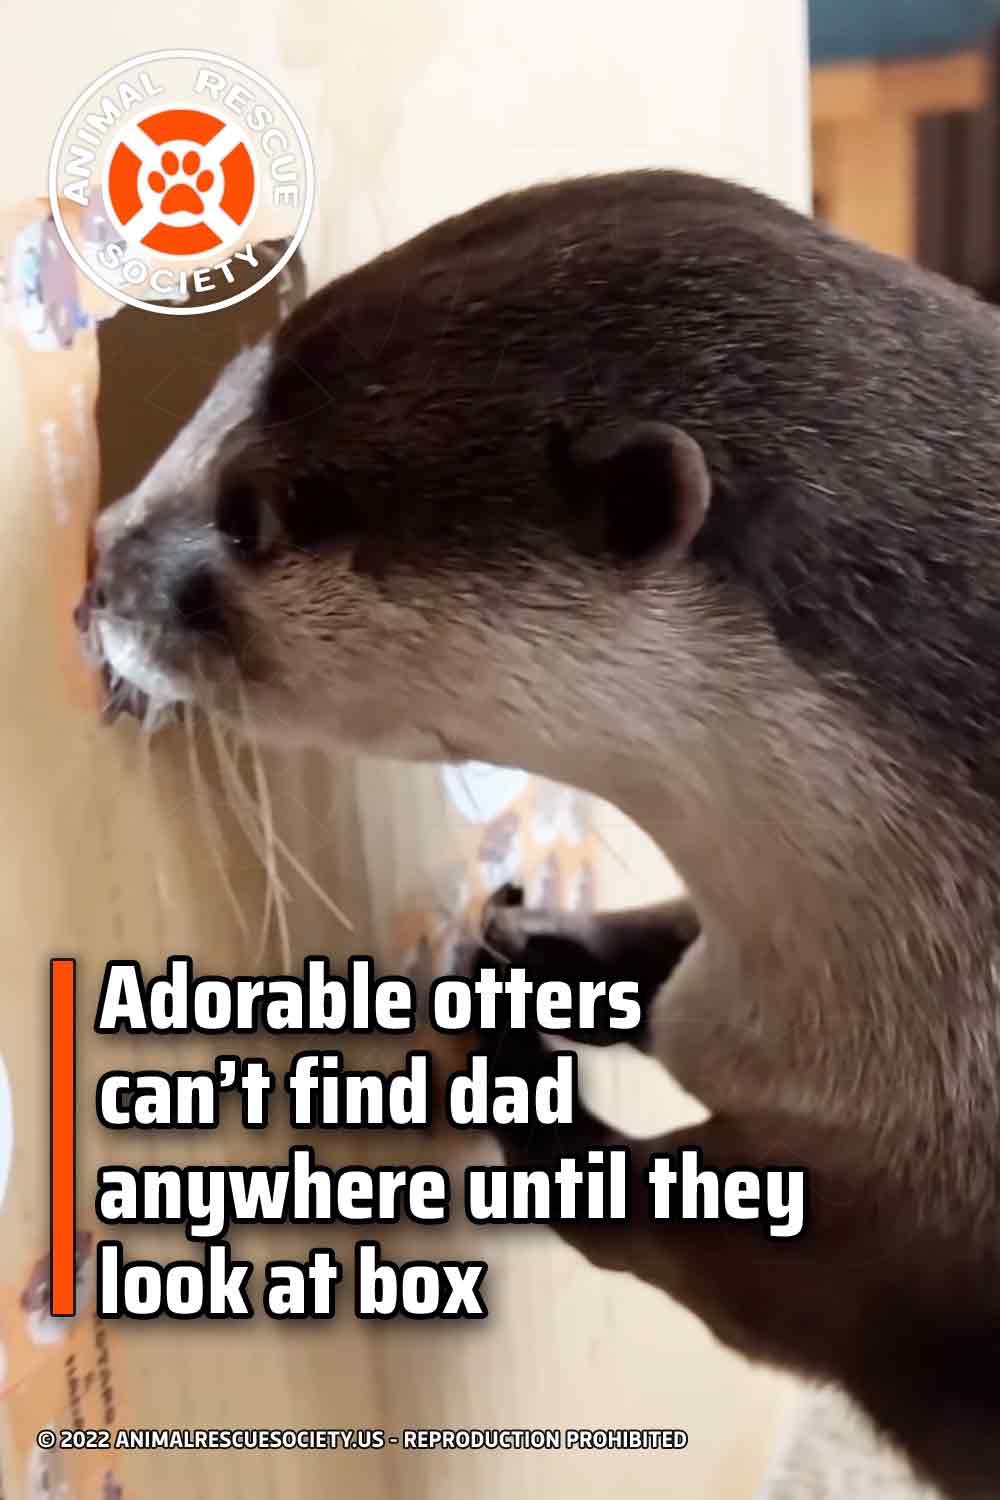 Adorable otters can’t find dad anywhere until they look at box